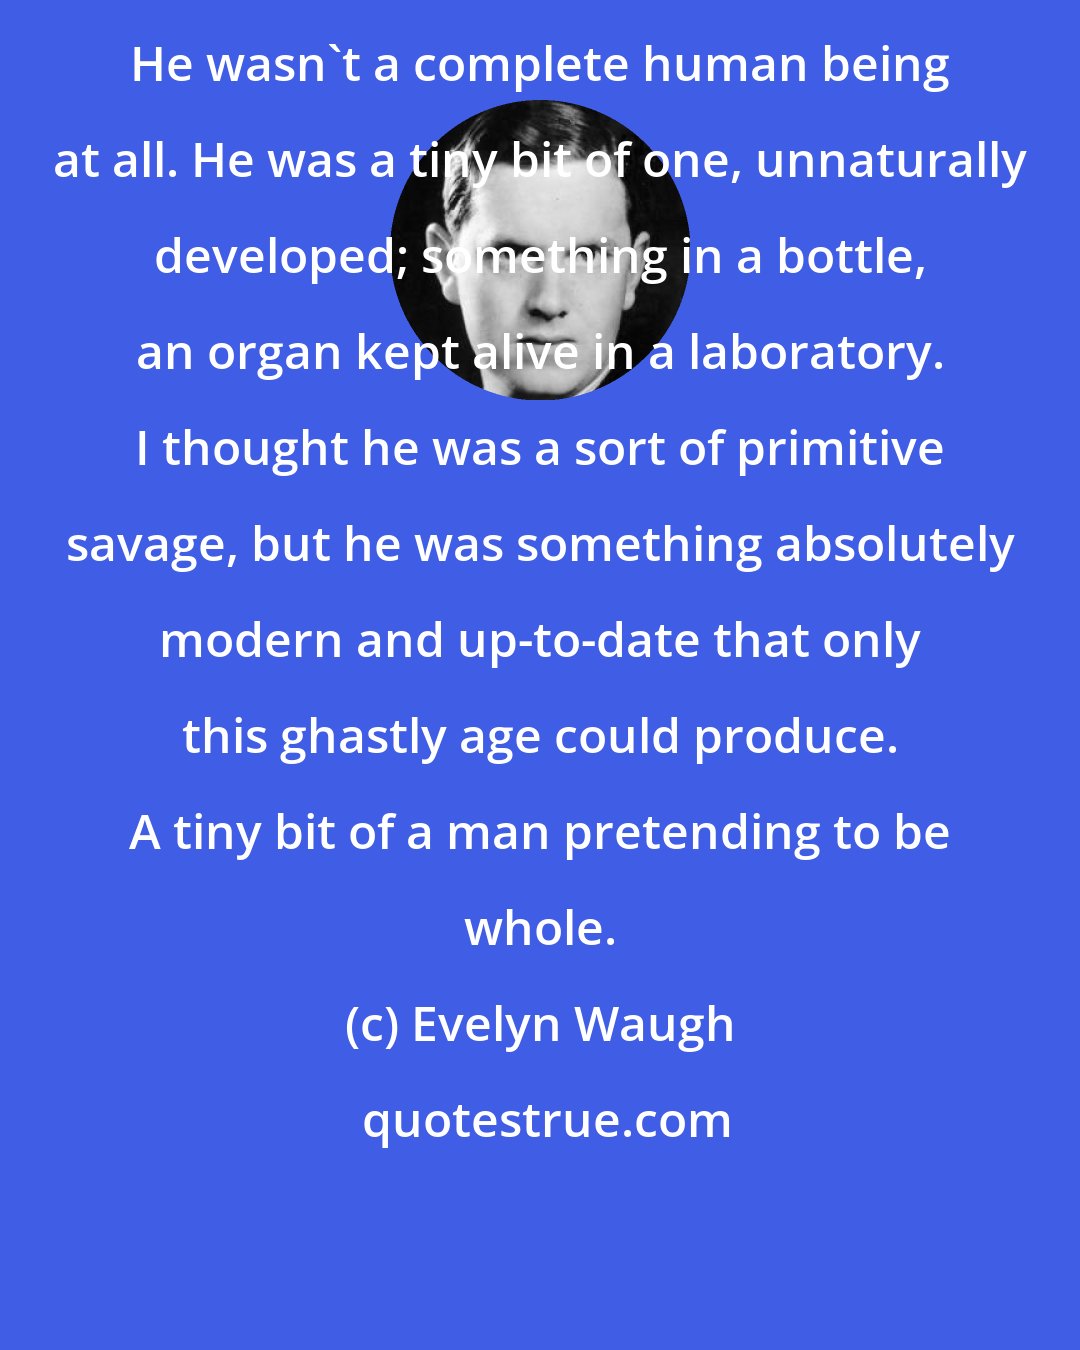 Evelyn Waugh: He wasn't a complete human being at all. He was a tiny bit of one, unnaturally developed; something in a bottle, an organ kept alive in a laboratory. I thought he was a sort of primitive savage, but he was something absolutely modern and up-to-date that only this ghastly age could produce. A tiny bit of a man pretending to be whole.